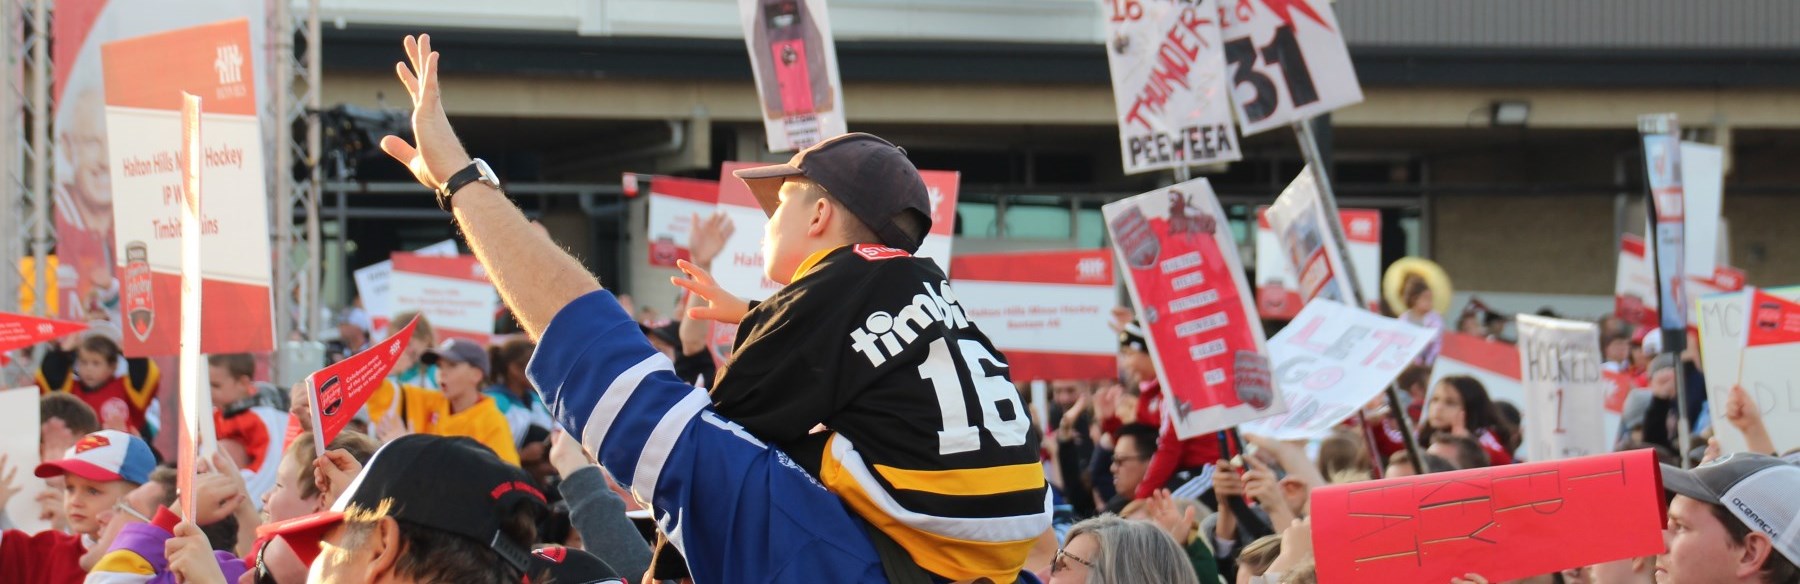 dad holding son on his shoulders in crowd of hockey fans